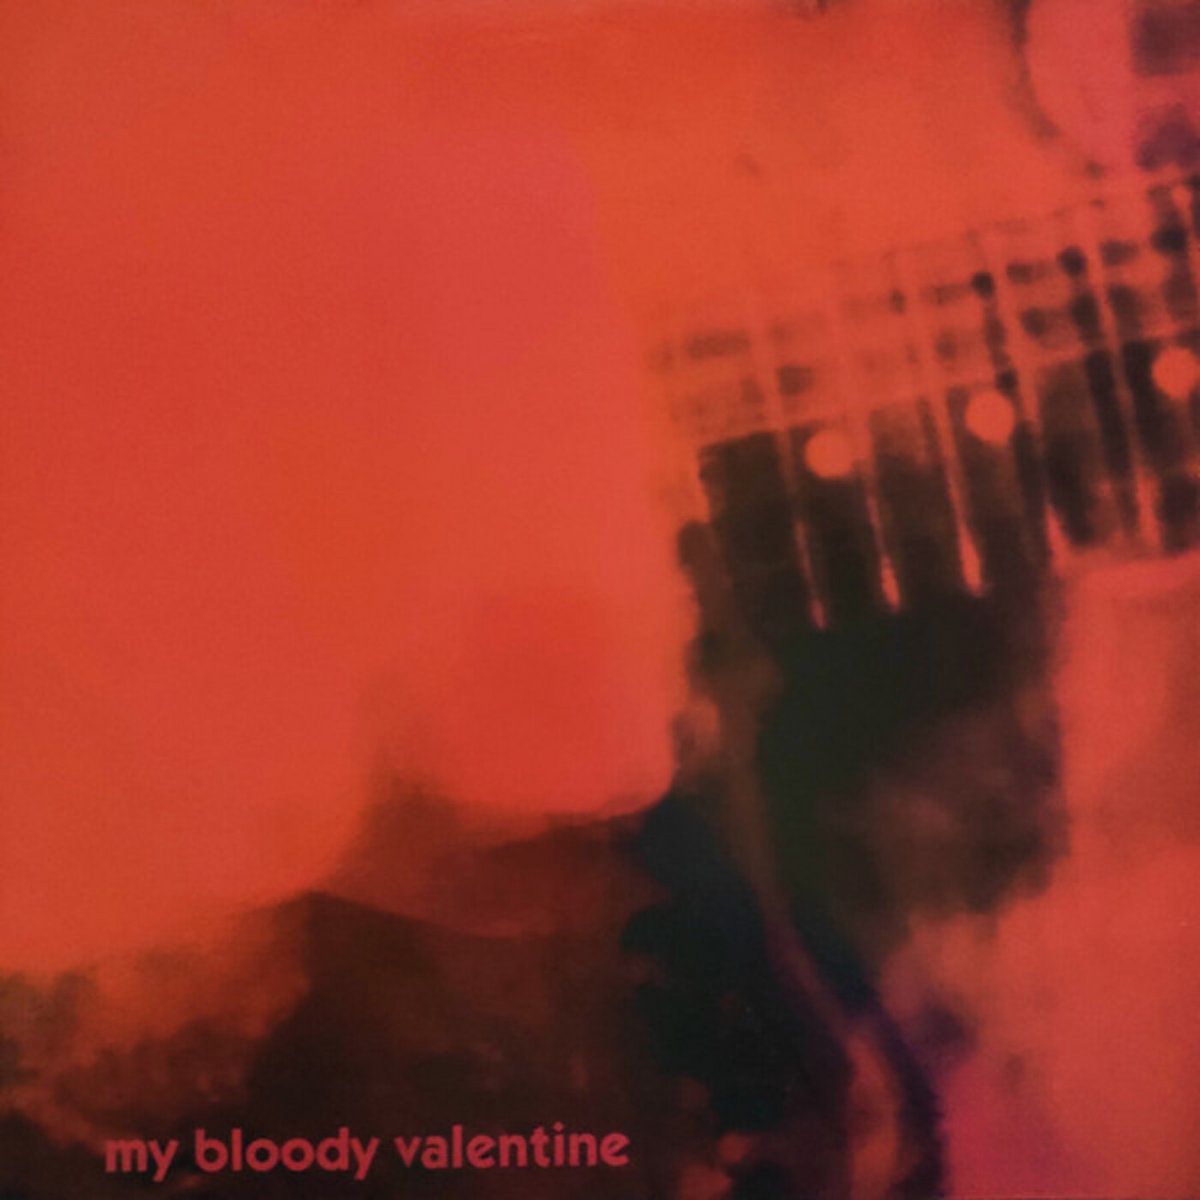 #Nineties - My Bloody Valentine - Only Shallow (1991)